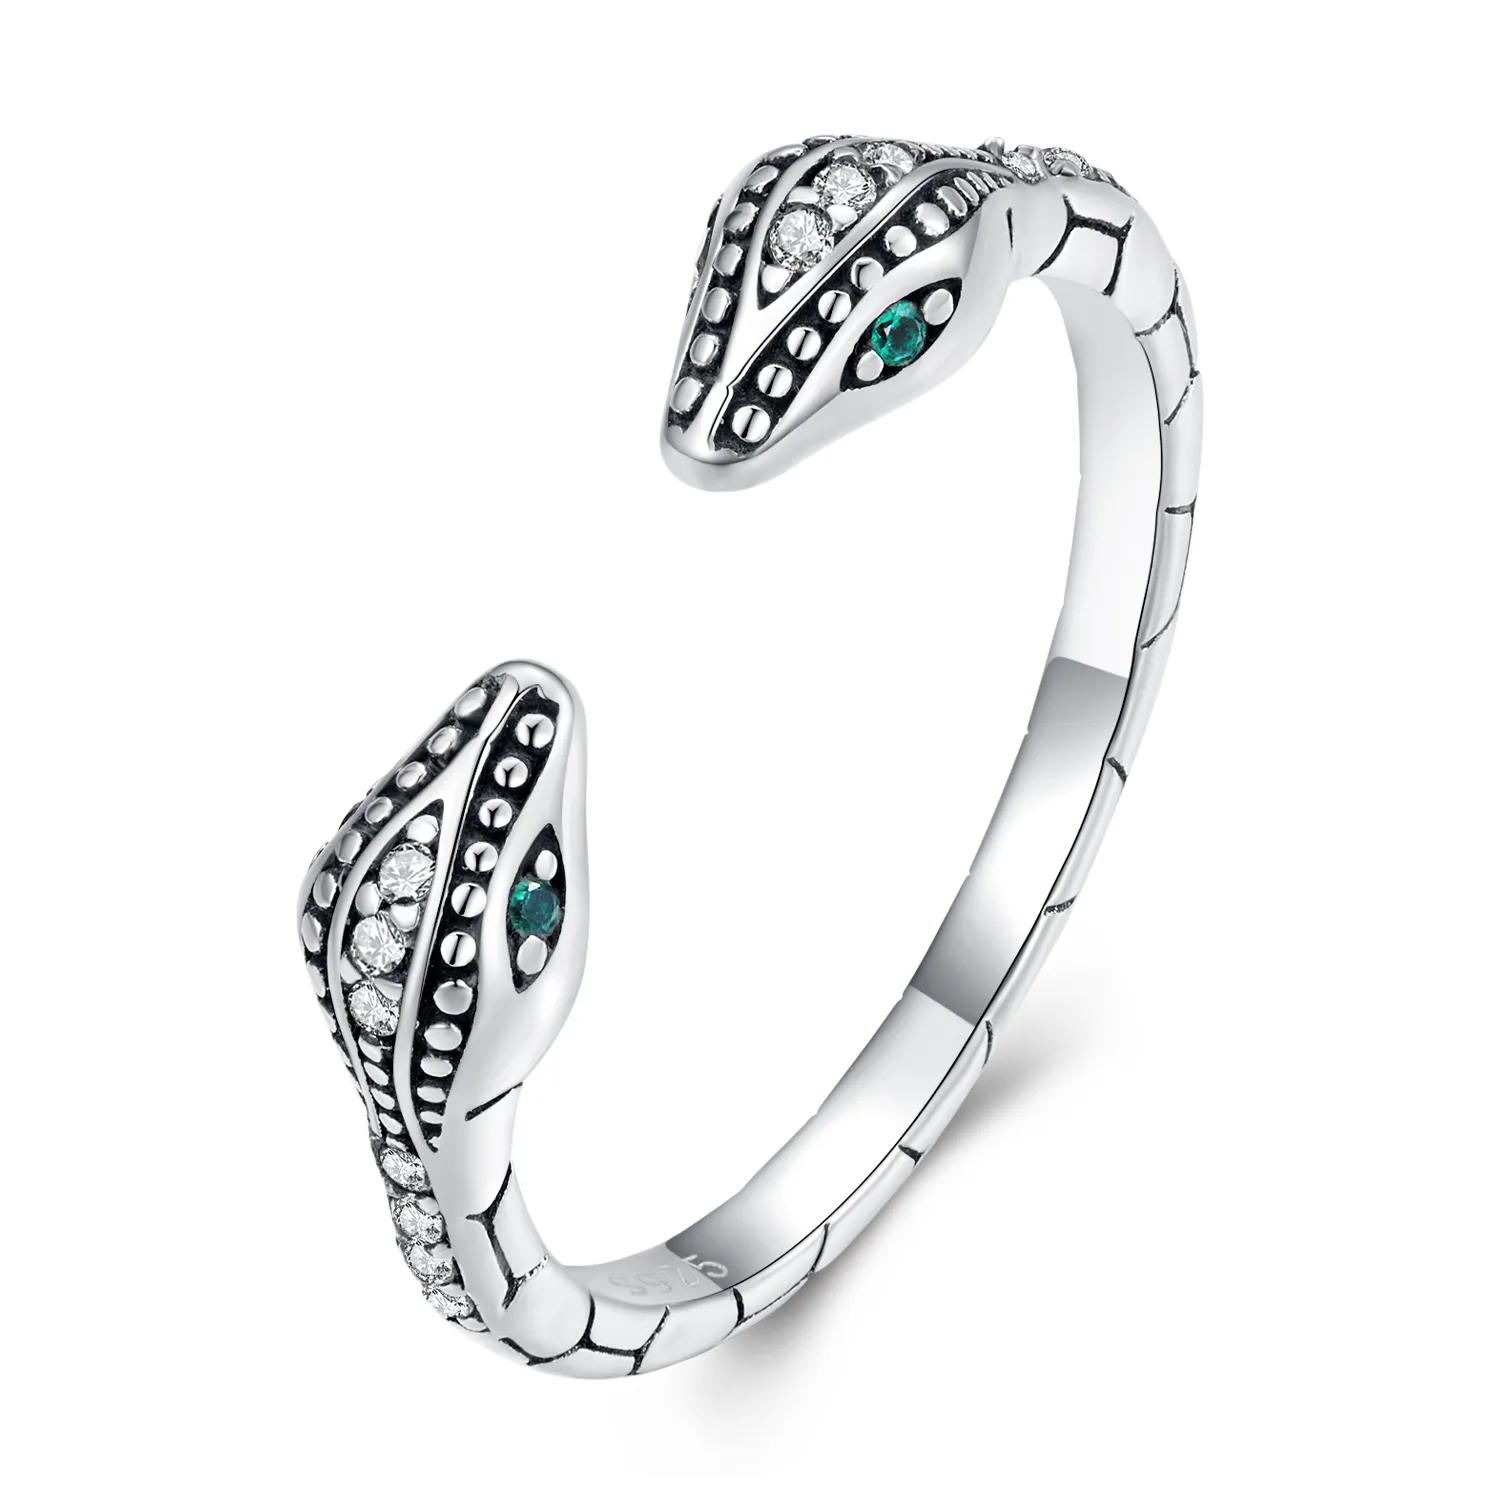 Pandora Style Two-Headed Snake Open Ring - BSR317